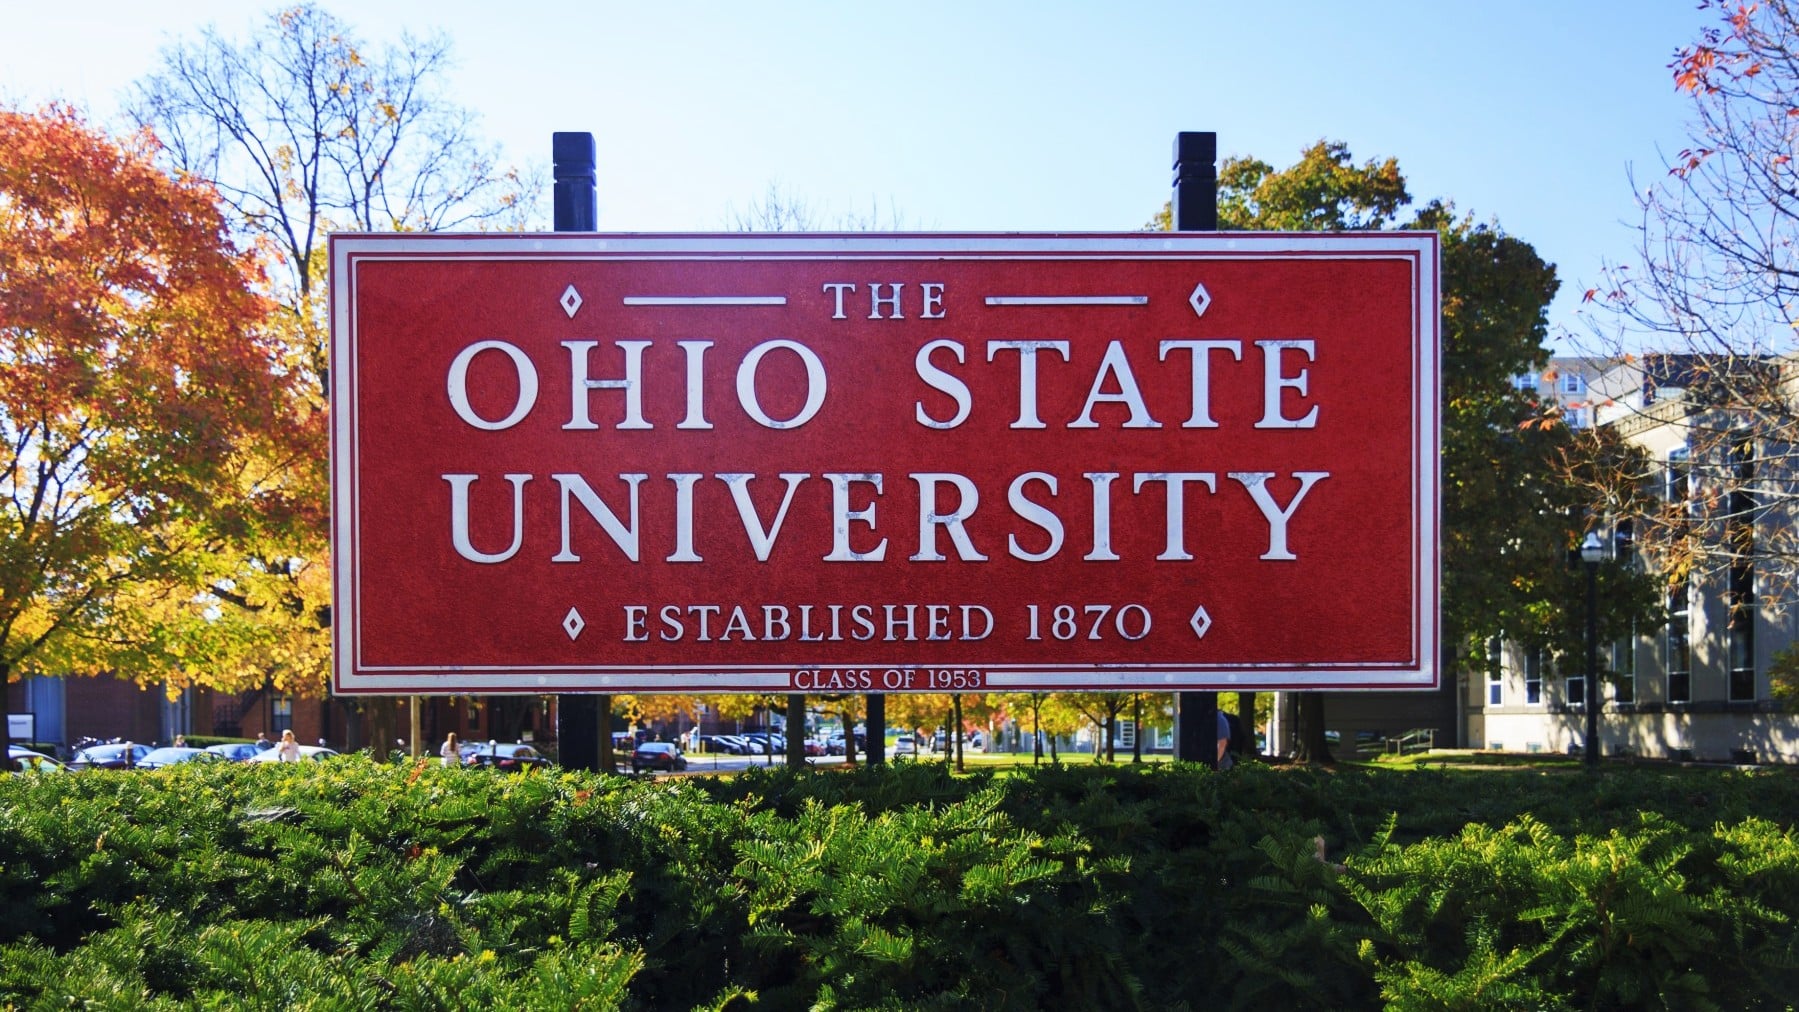 Where to stay in Columbus - Near the University of Ohio